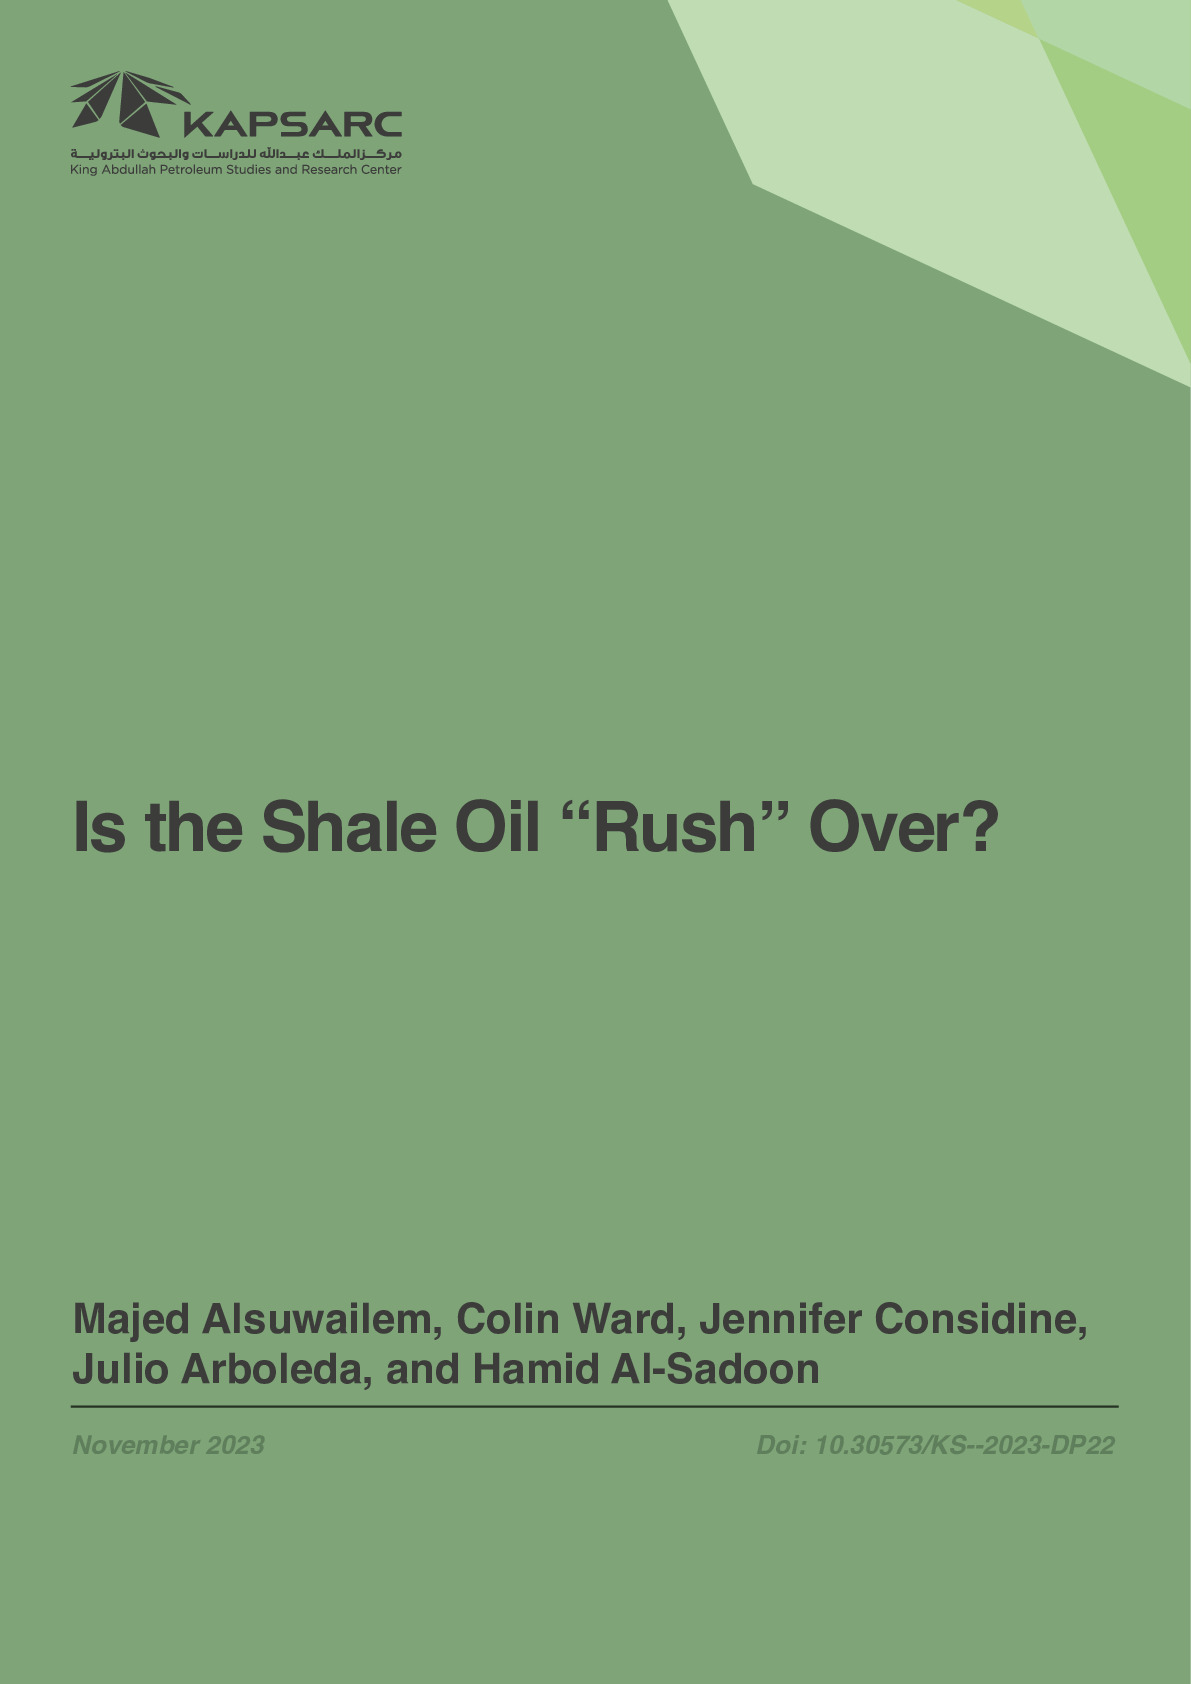 Is the Shale Oil “Rush” Over?